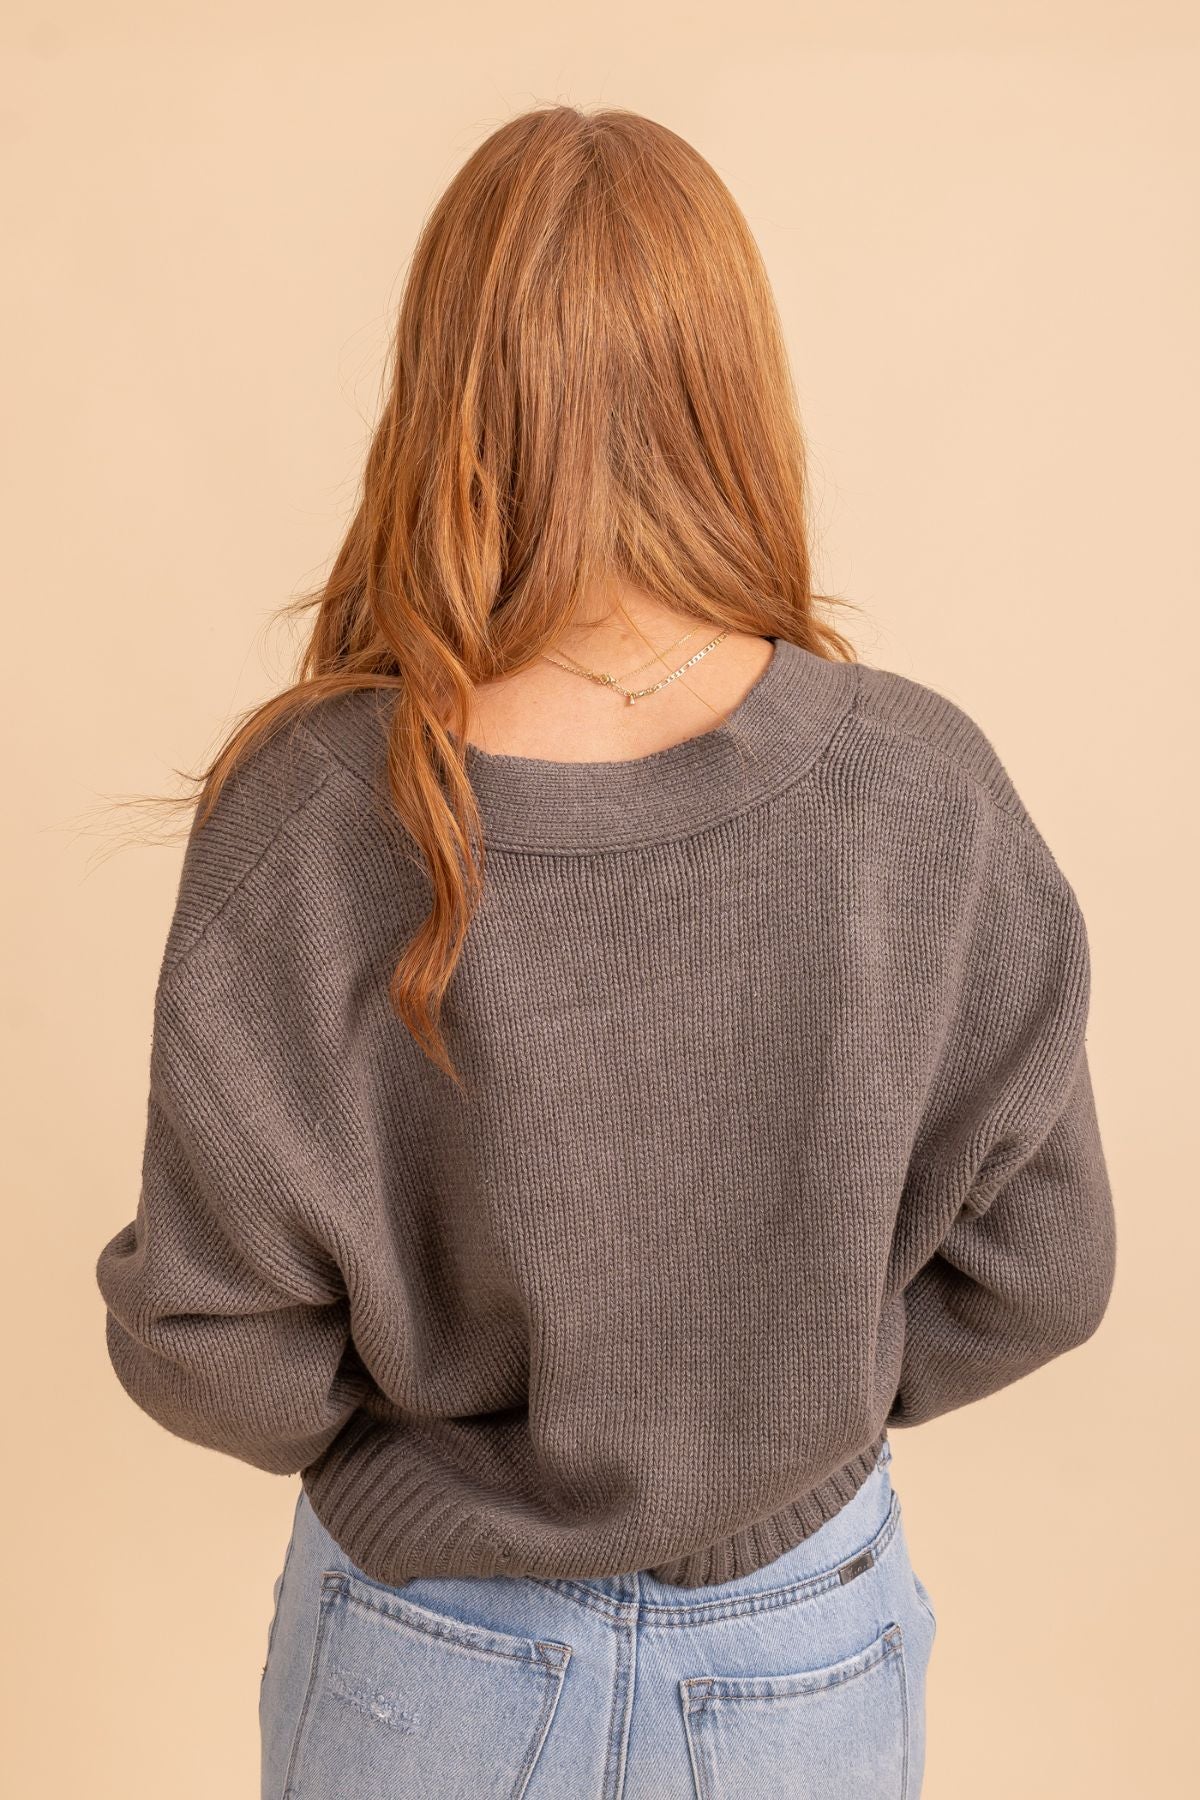 High quality gray sweater